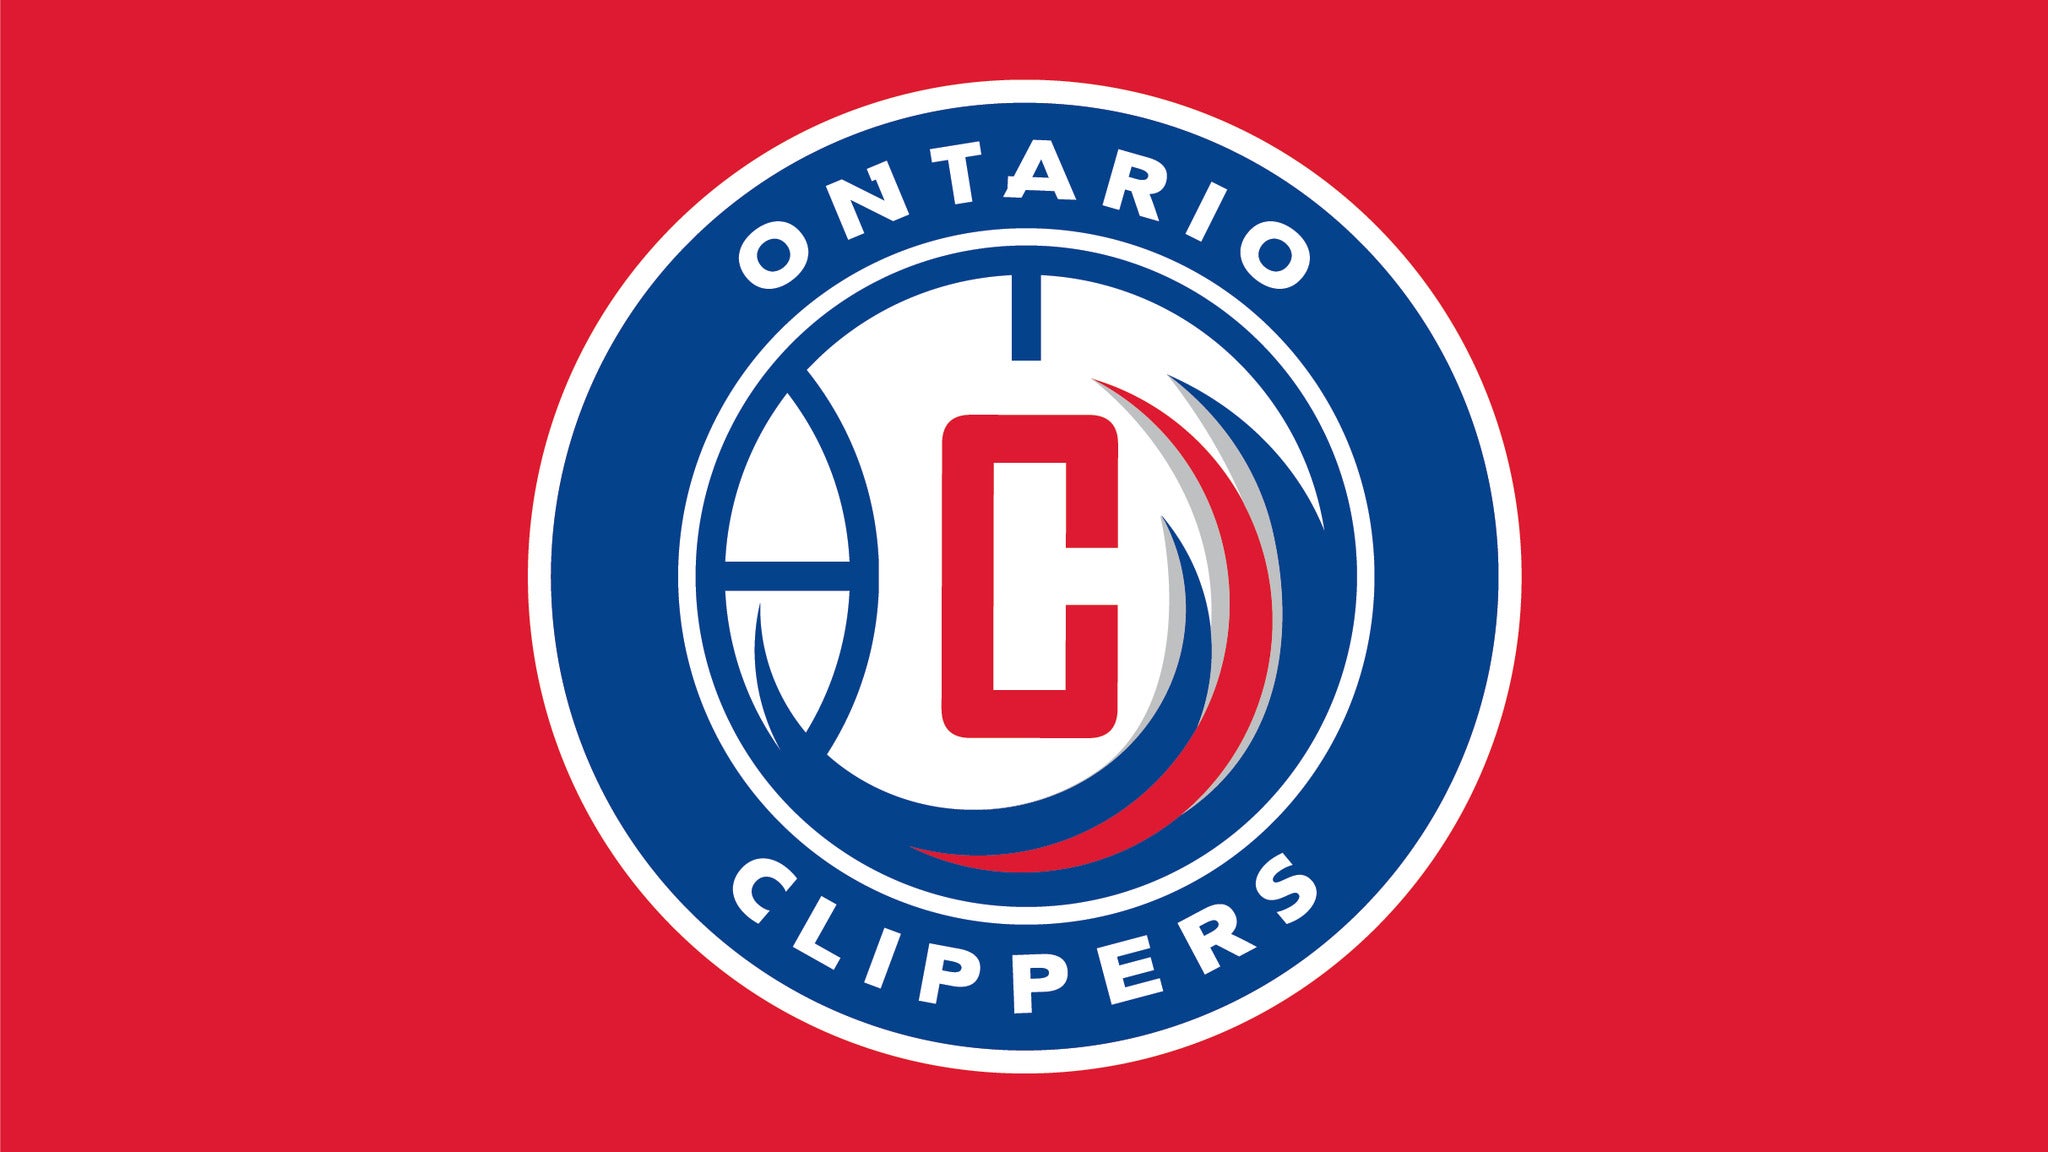 Ontario Clippers vs. South Bay Lakers at Toyota Arena - Ontario, CA 91764